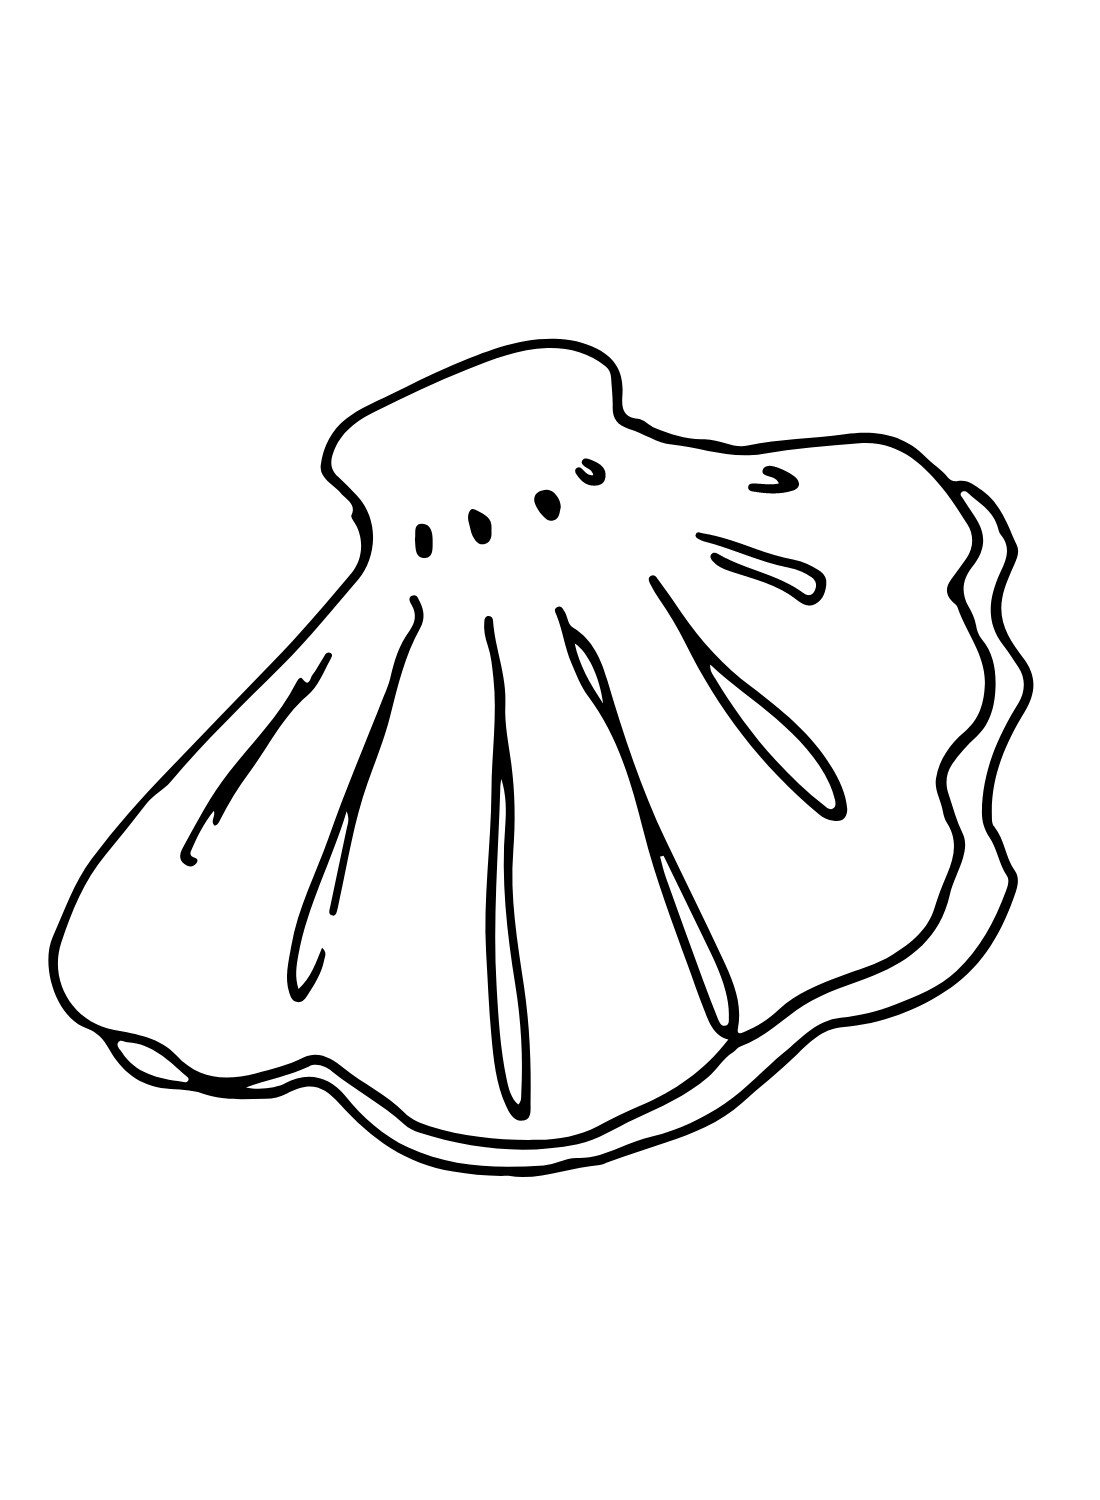 Scallop Free Coloring Page